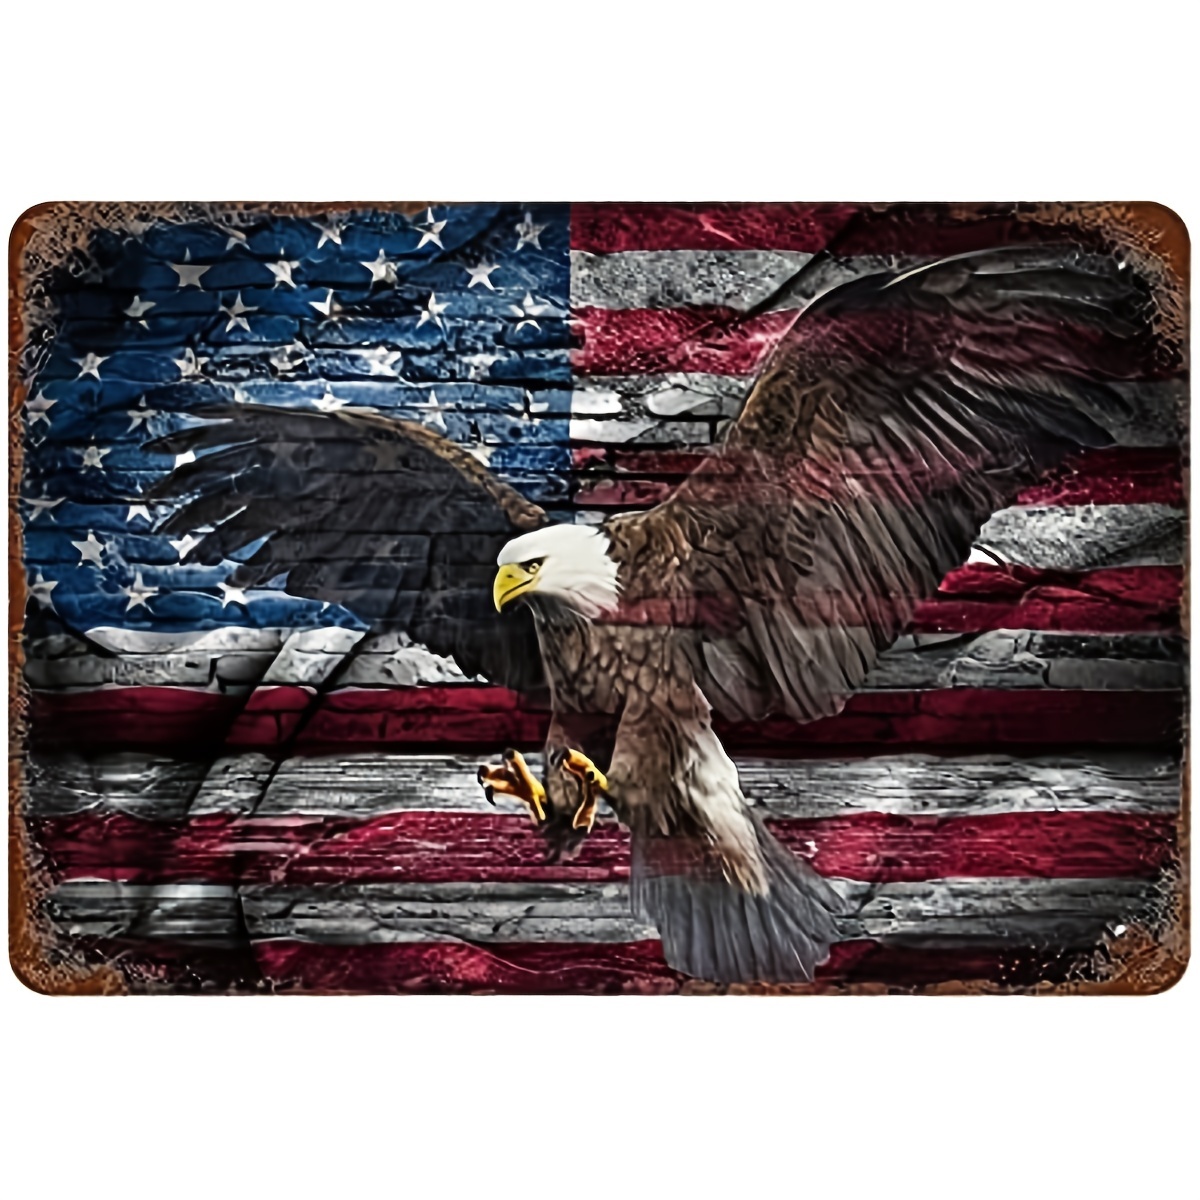 1pc American Mad Eagle Flag Metal Tin Sign Wall Decor Man Cave Bar US United States Flag Patriotic Metal Sign America 12x8 Inch